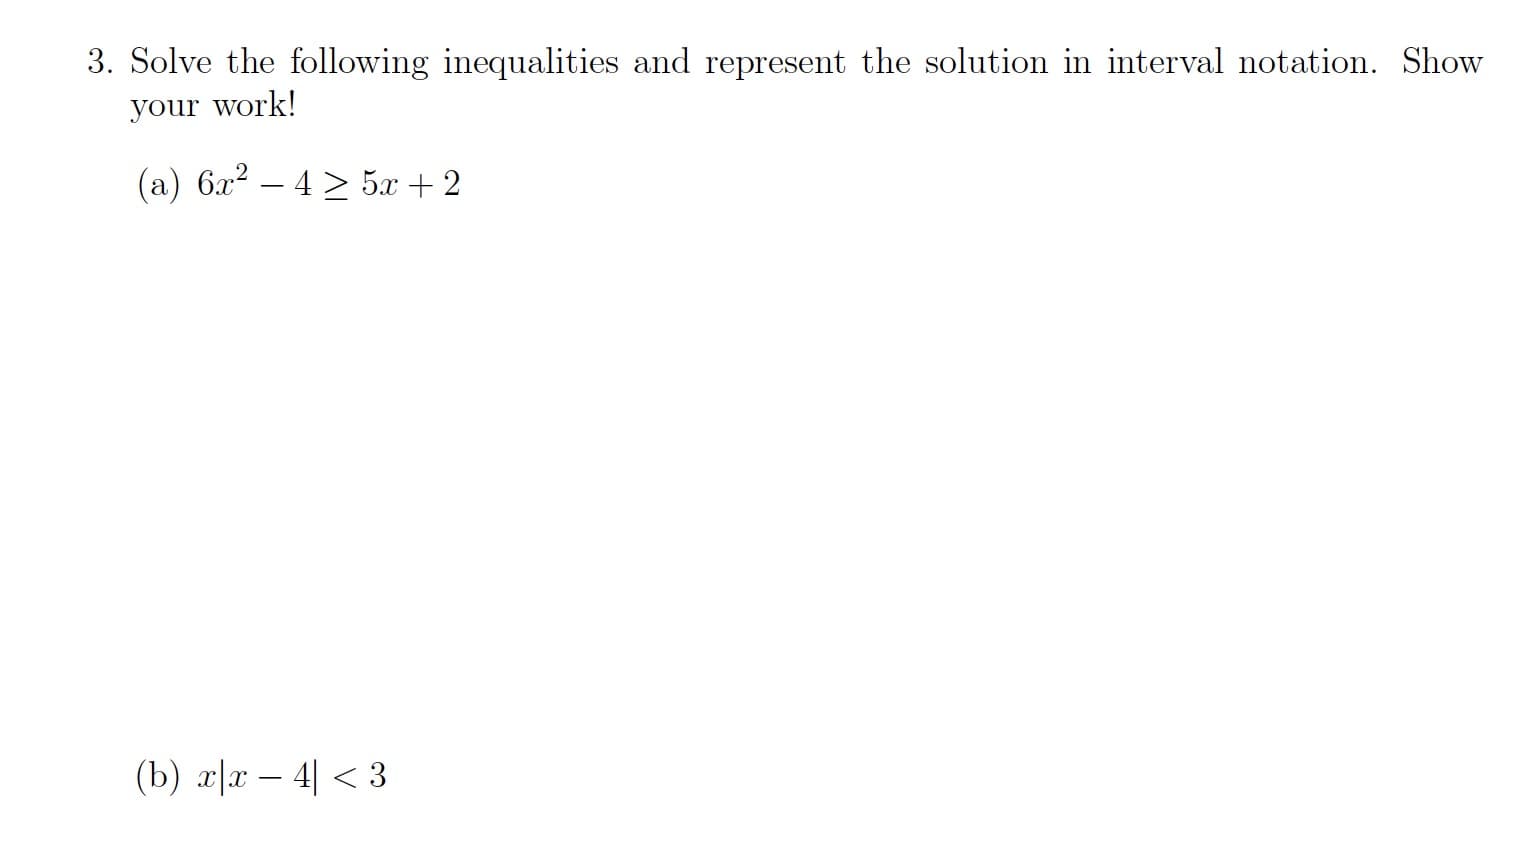 3. Solve the following inequalities and represent the solution in interval notation. Show
your work!
(a) 6x? – 4 > 5x + 2
